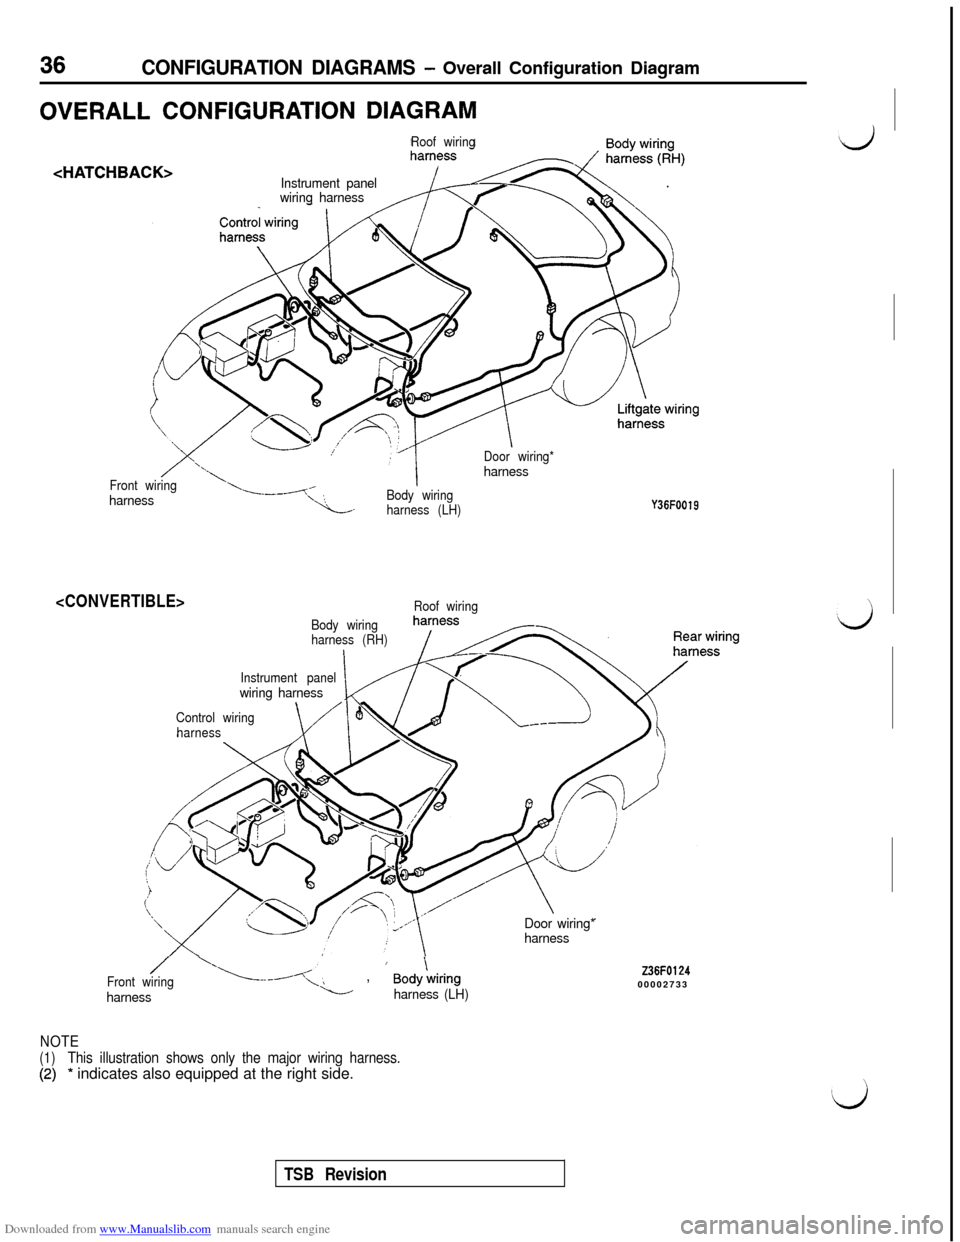 MITSUBISHI 3000GT 1995 2.G Workshop Manual Downloaded from www.Manualslib.com manuals search engine 36CONFIGURATION DIAGRAMS - Overall Configuration Diagram
OVERALL CONFIGURATION DIAGRAM
<HAT1
Roof wiring
CHBACK>Instrument panel
wiring harness